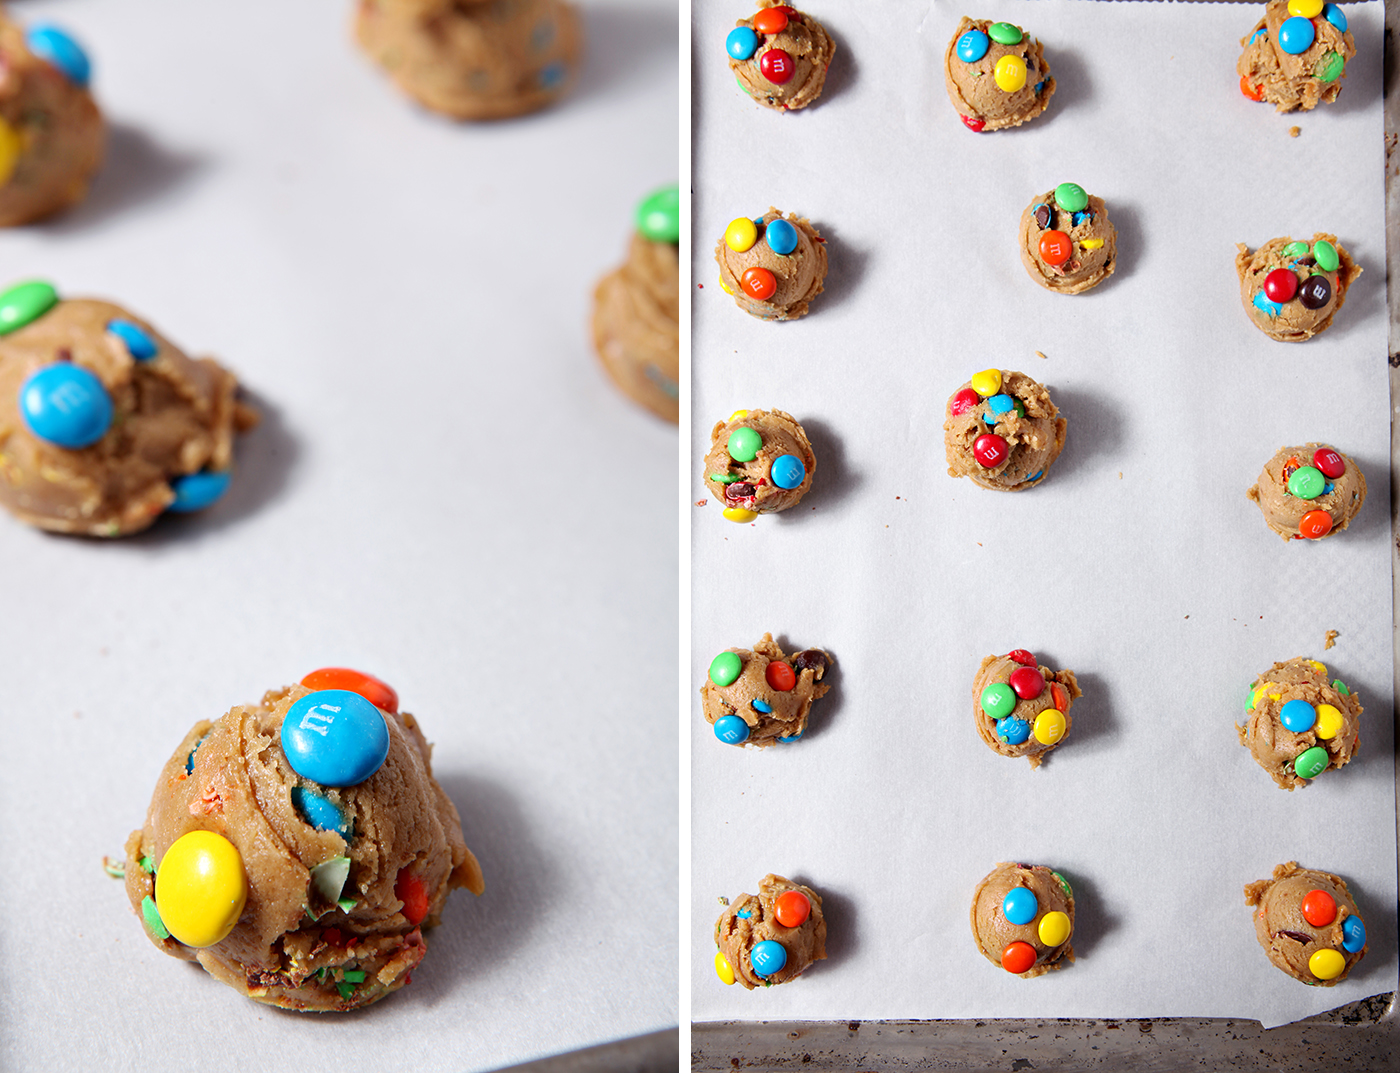 These M&M Cookies are the perfect dessert! The miniature sugar cookies are sweet, fluffy and chock full of plain M&M's. @speckledpalate for @mycookingspot